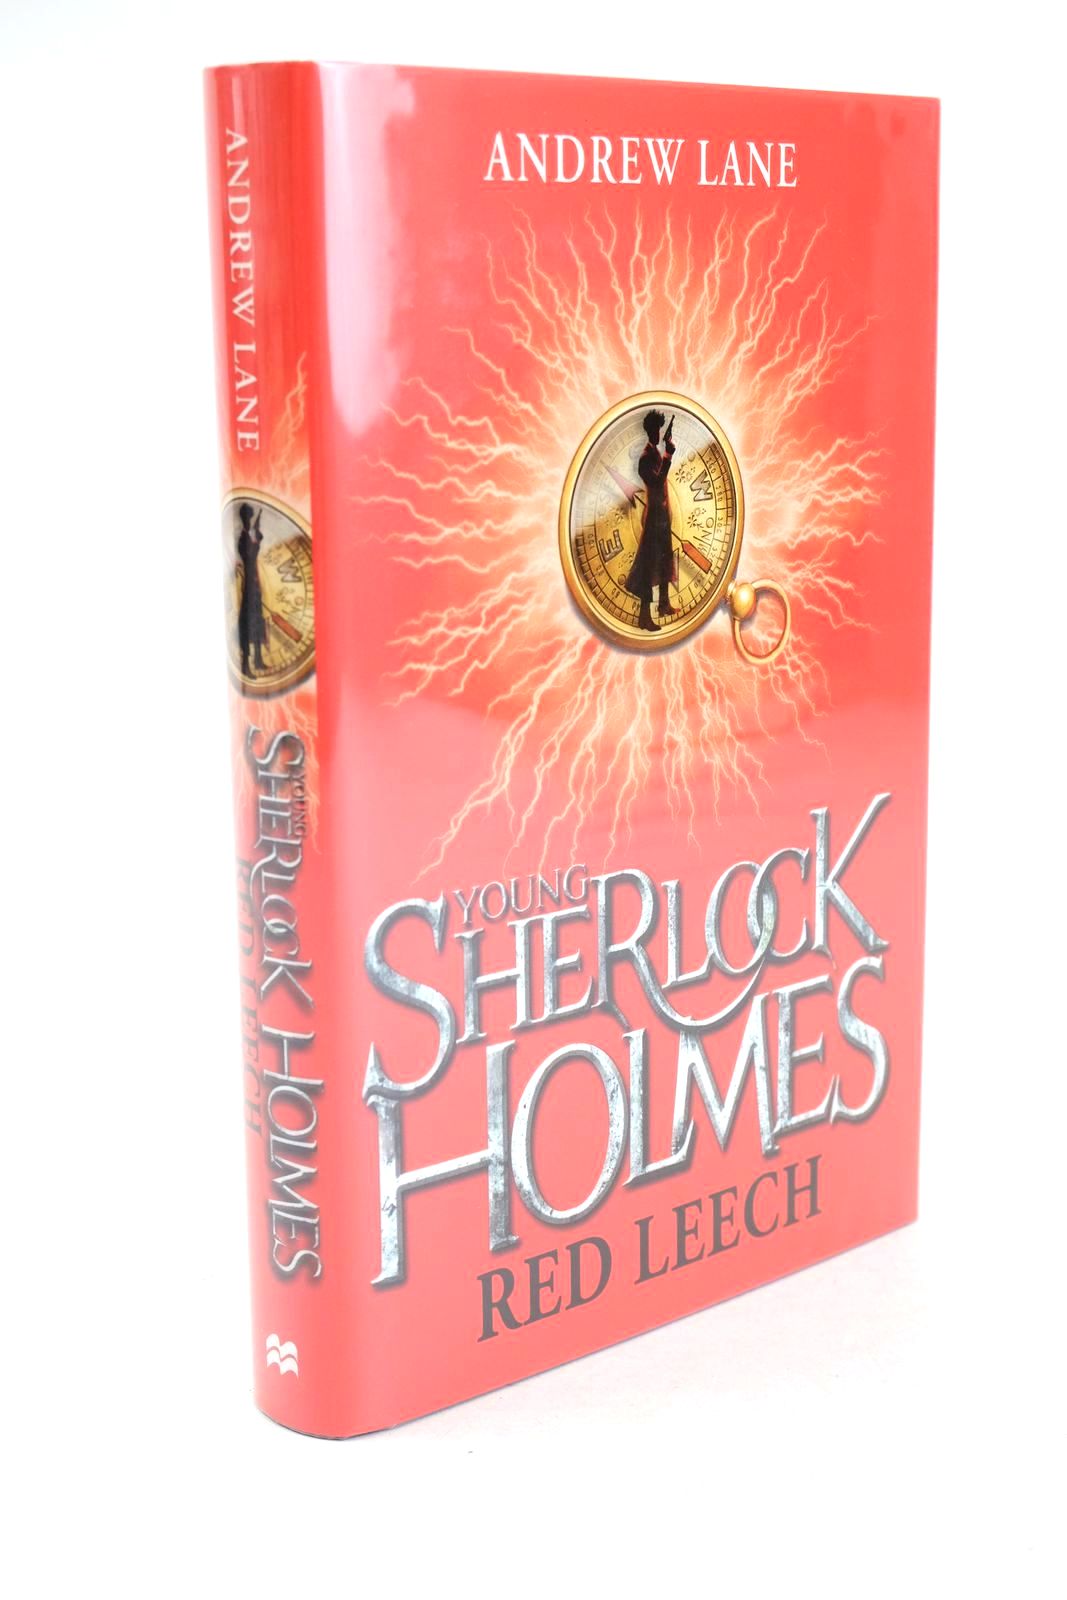 Photo of YOUNG SHERLOCK HOLMES - RED LEECH written by Lane, Andrew illustrated by Walker, Kev Hadley, Sam published by Macmillan Children's Books (STOCK CODE: 1325750)  for sale by Stella & Rose's Books